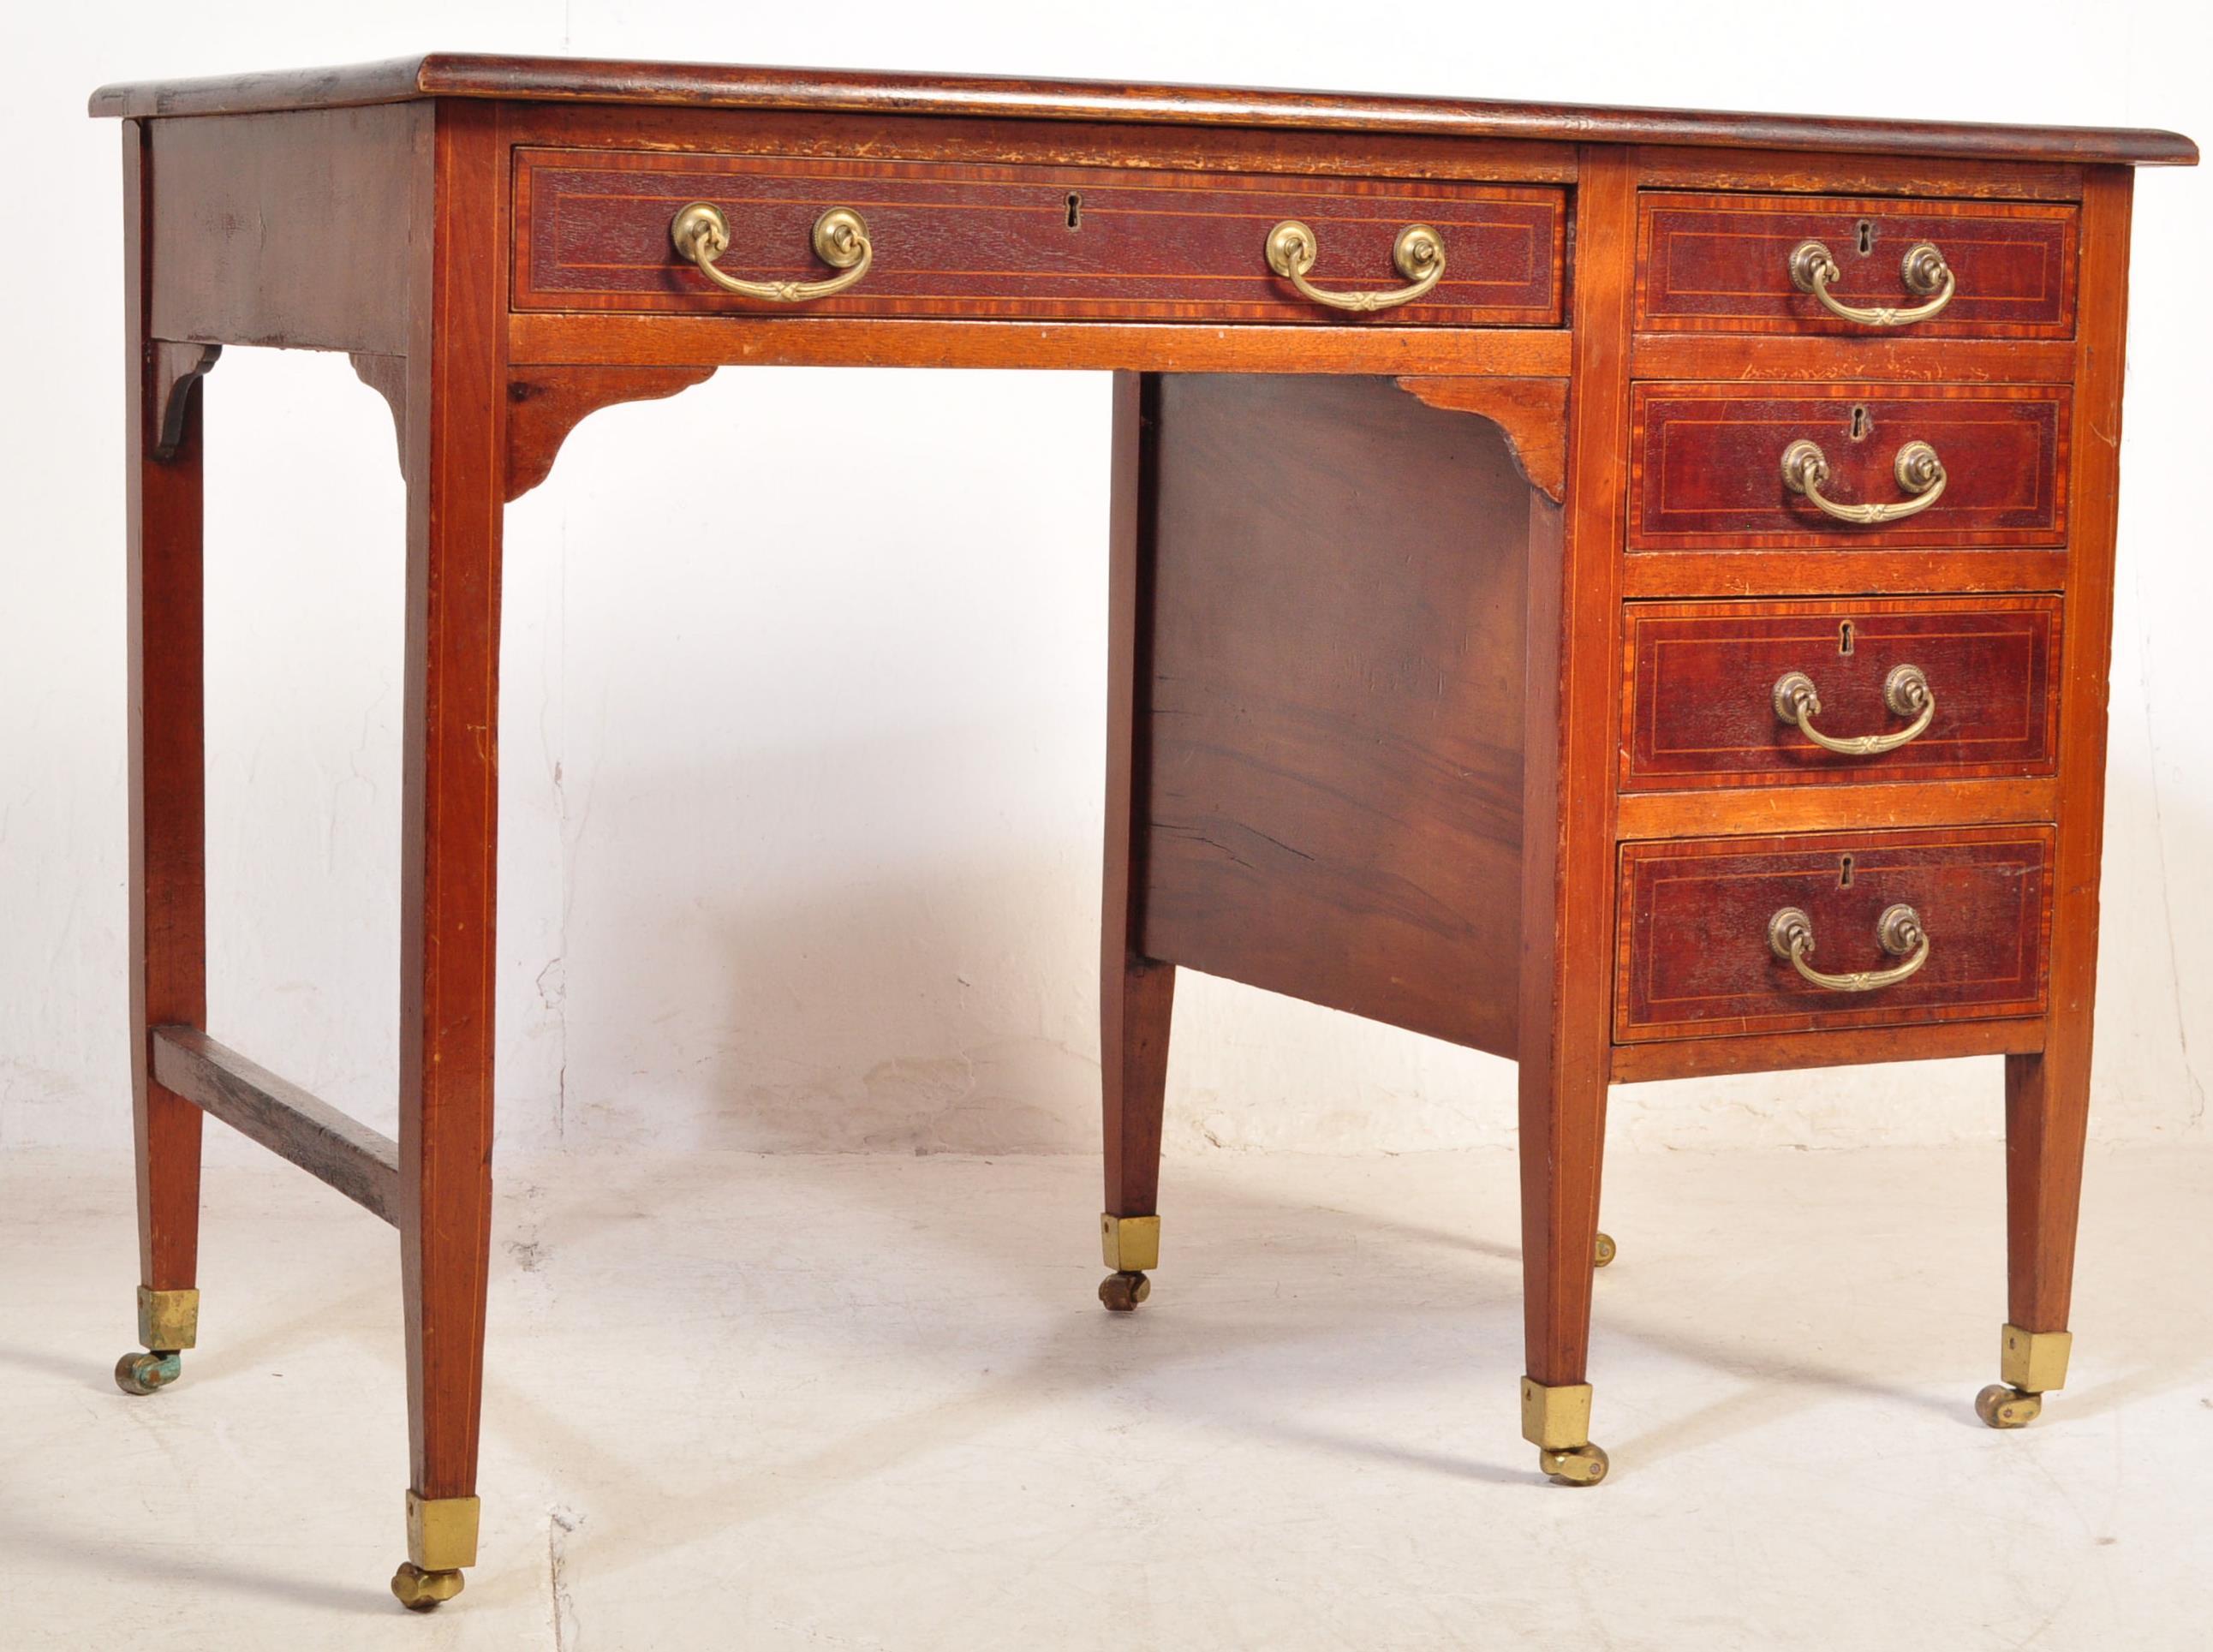 AN EDWARDIAN MAHOGANY LEATHER TOP WRITING DESK/TABLE